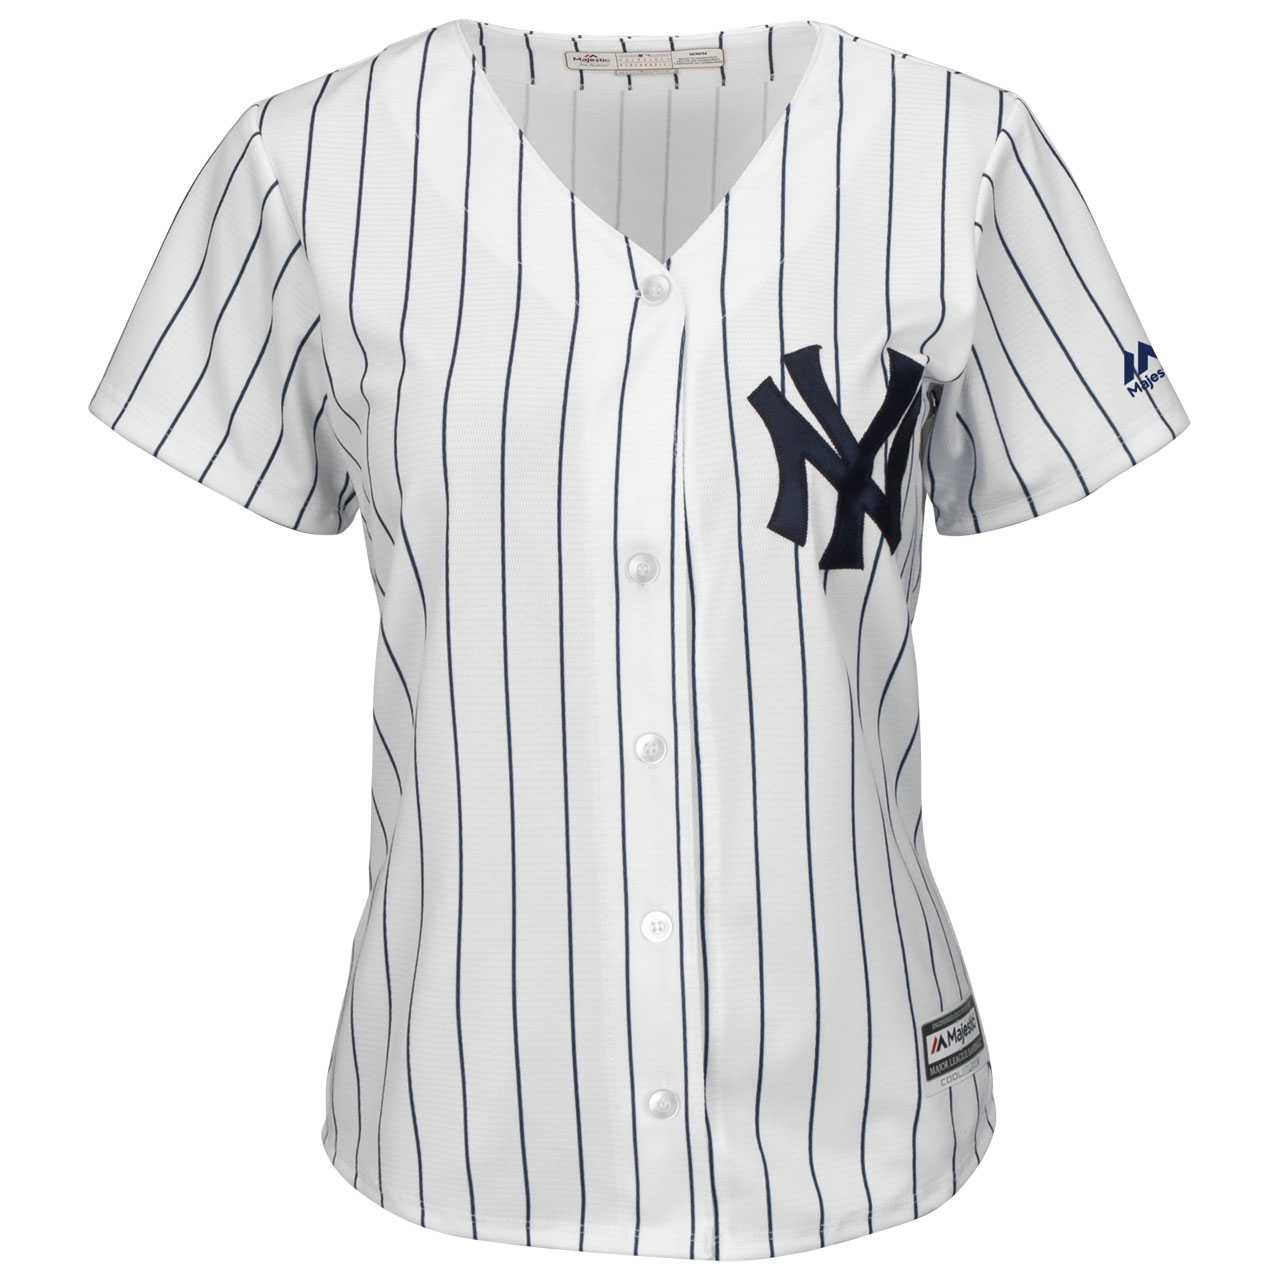 Aaron Judge New York Yankees Road Jersey by Majestic - XLT